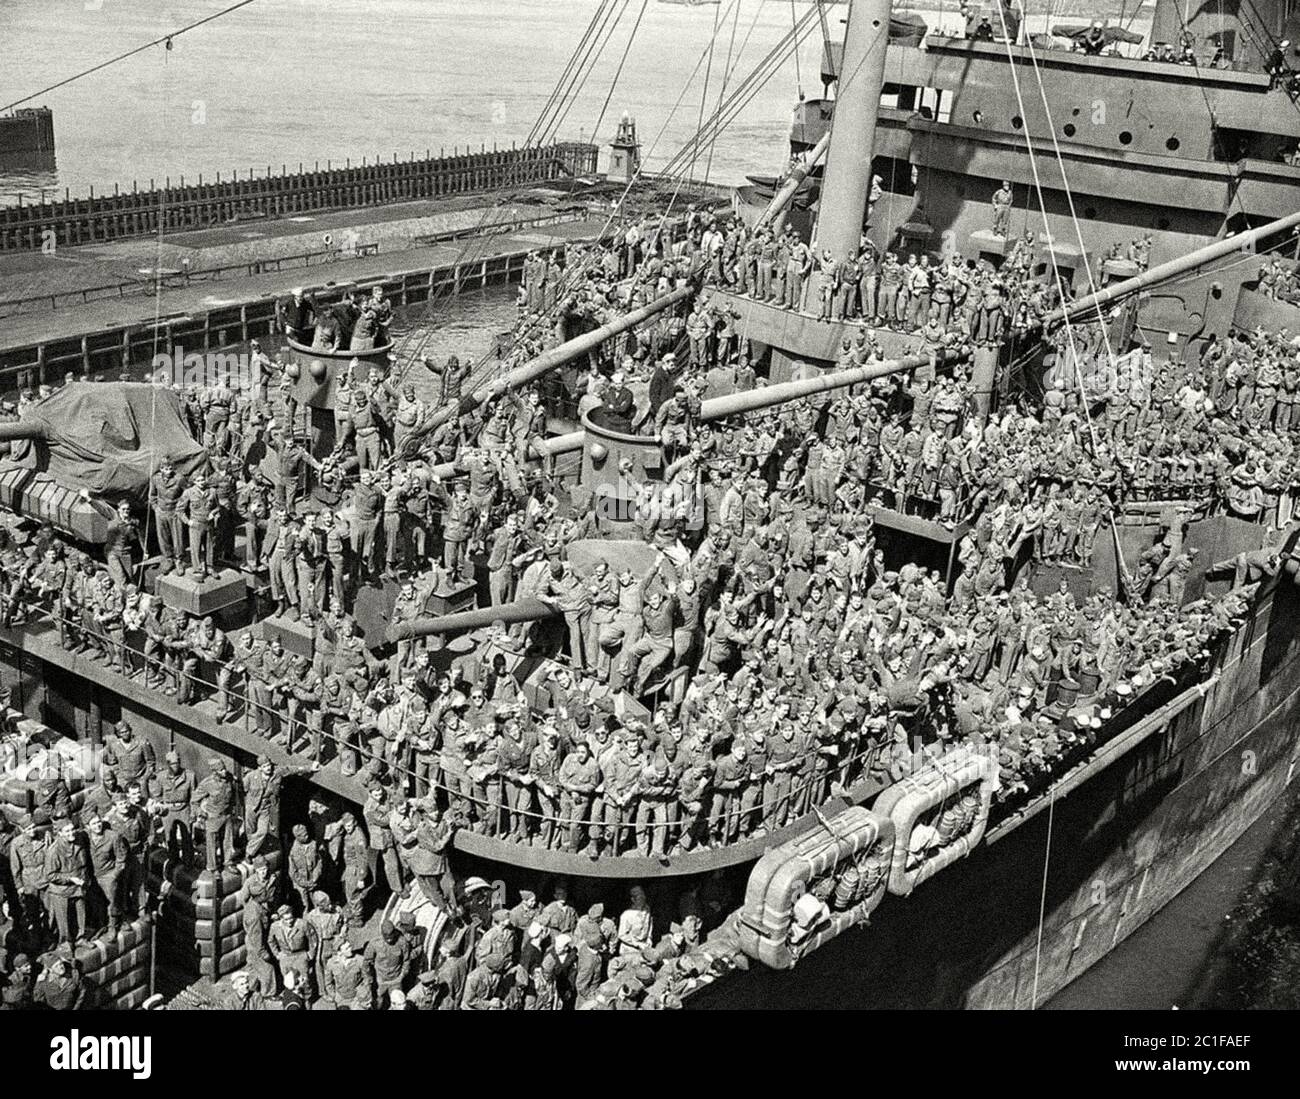 The super transport ship, General W.P. Richardson, docked in New York, with veterans of the European war cheering on June 7, 1945. Many soldiers were Stock Photo